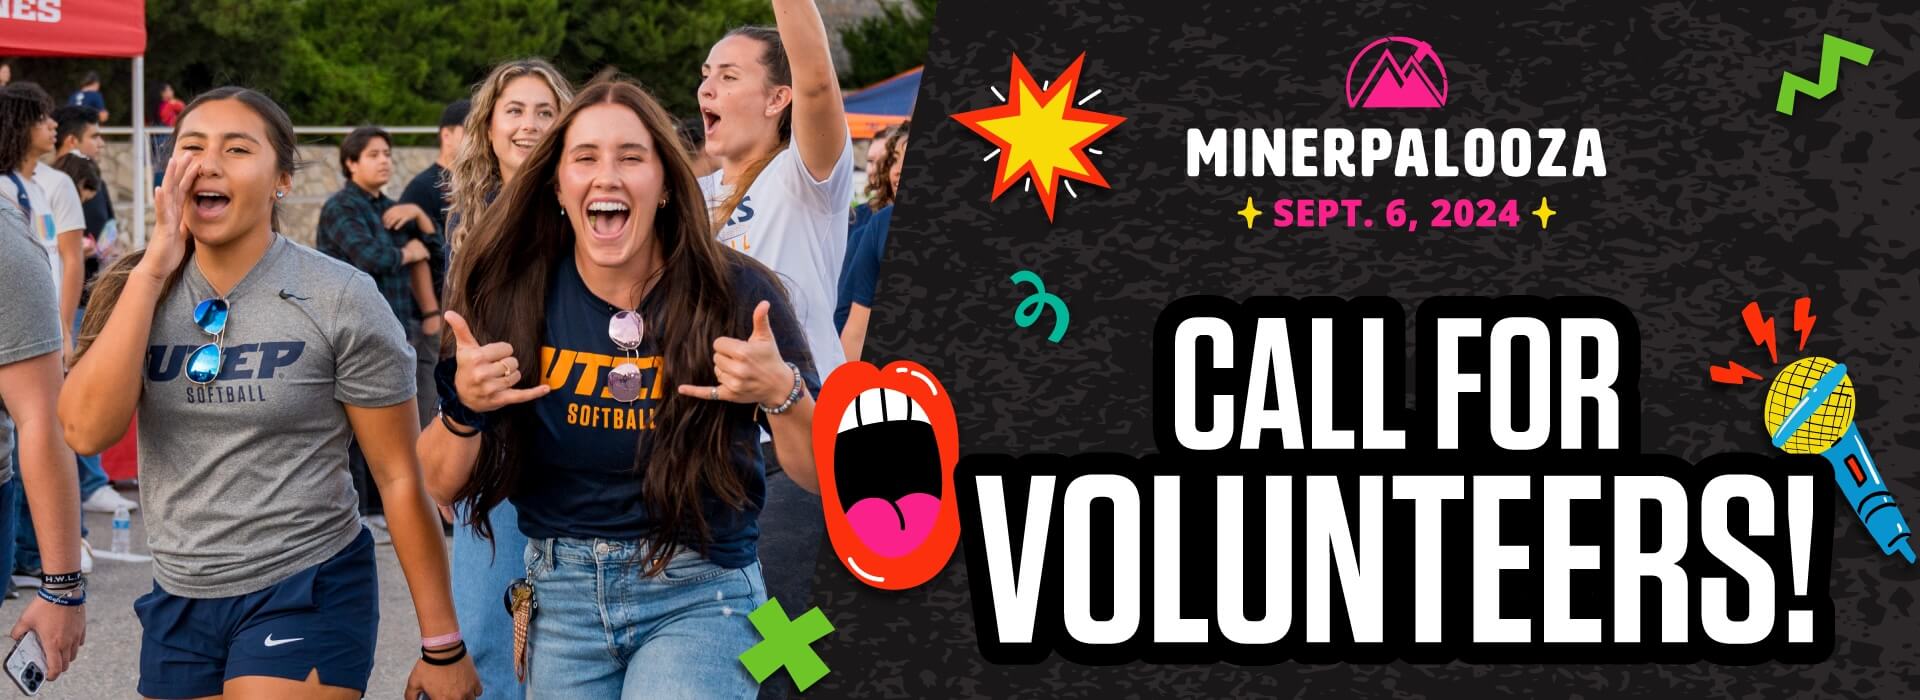 Call for volunteers at Minerpalooza 